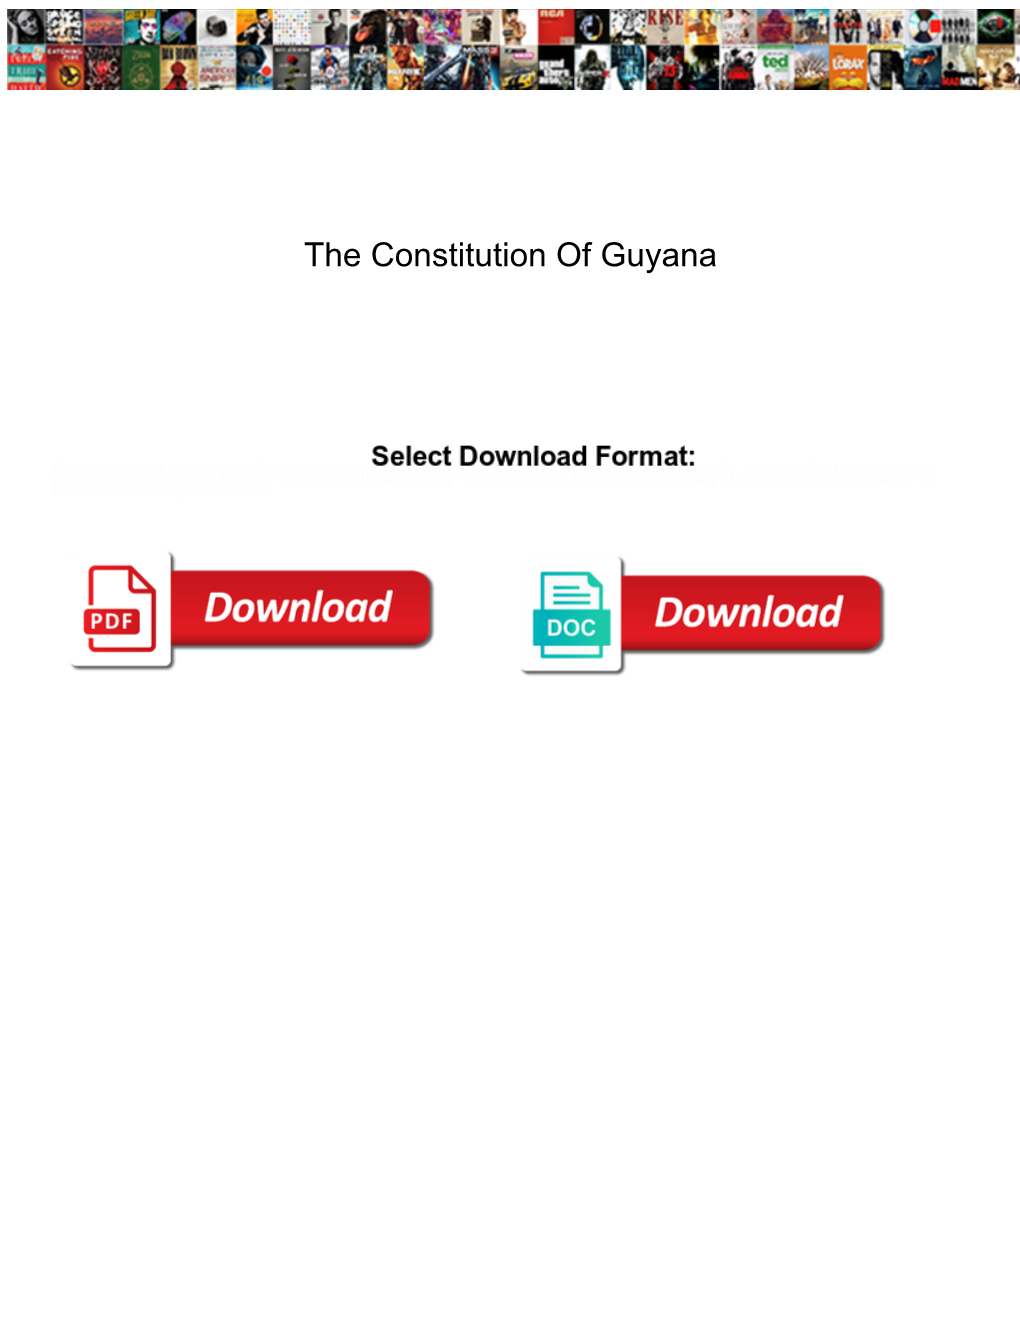 The Constitution of Guyana